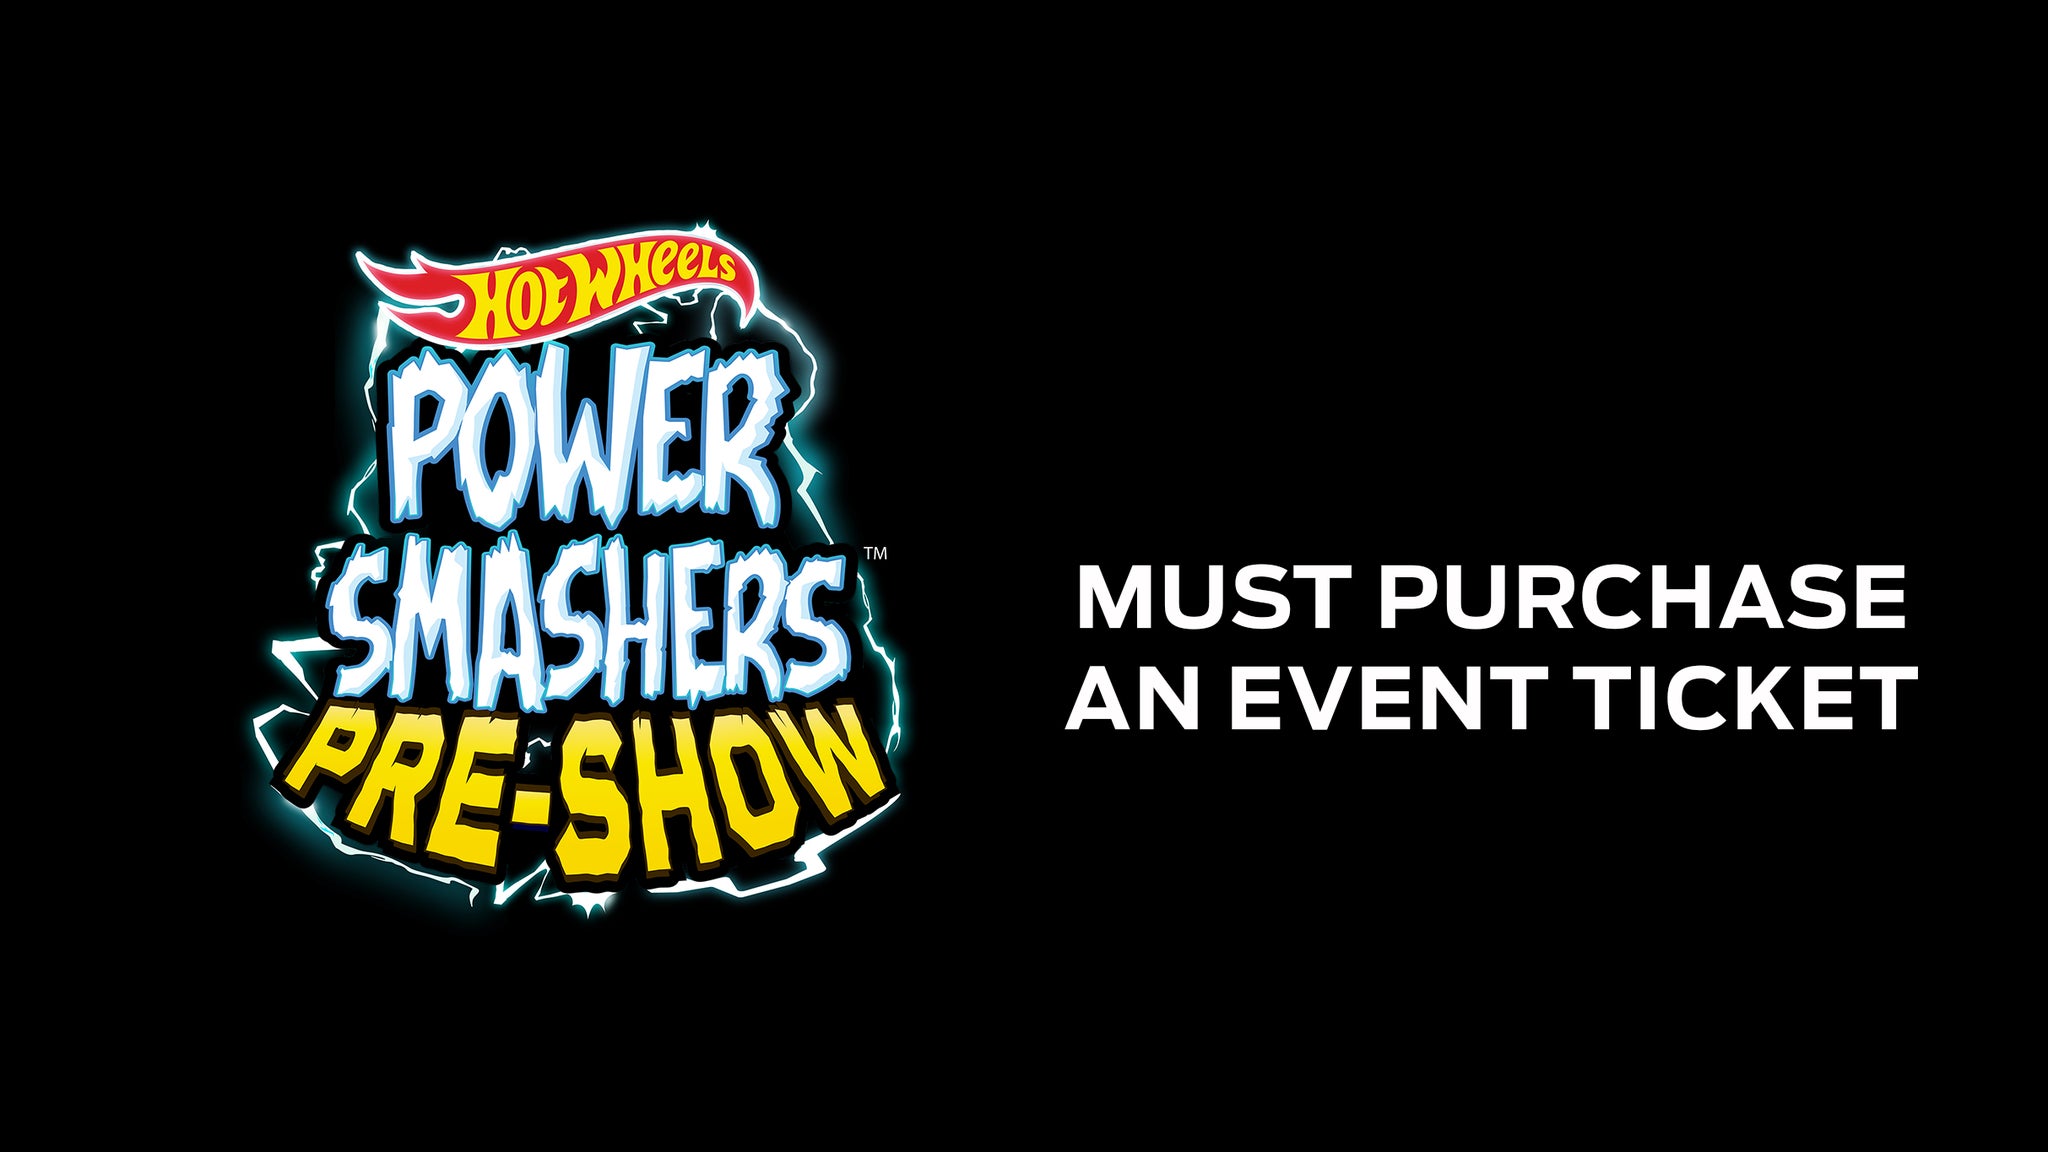 Hot Wheels Power Smashers Pre-Show Starts At 5pm